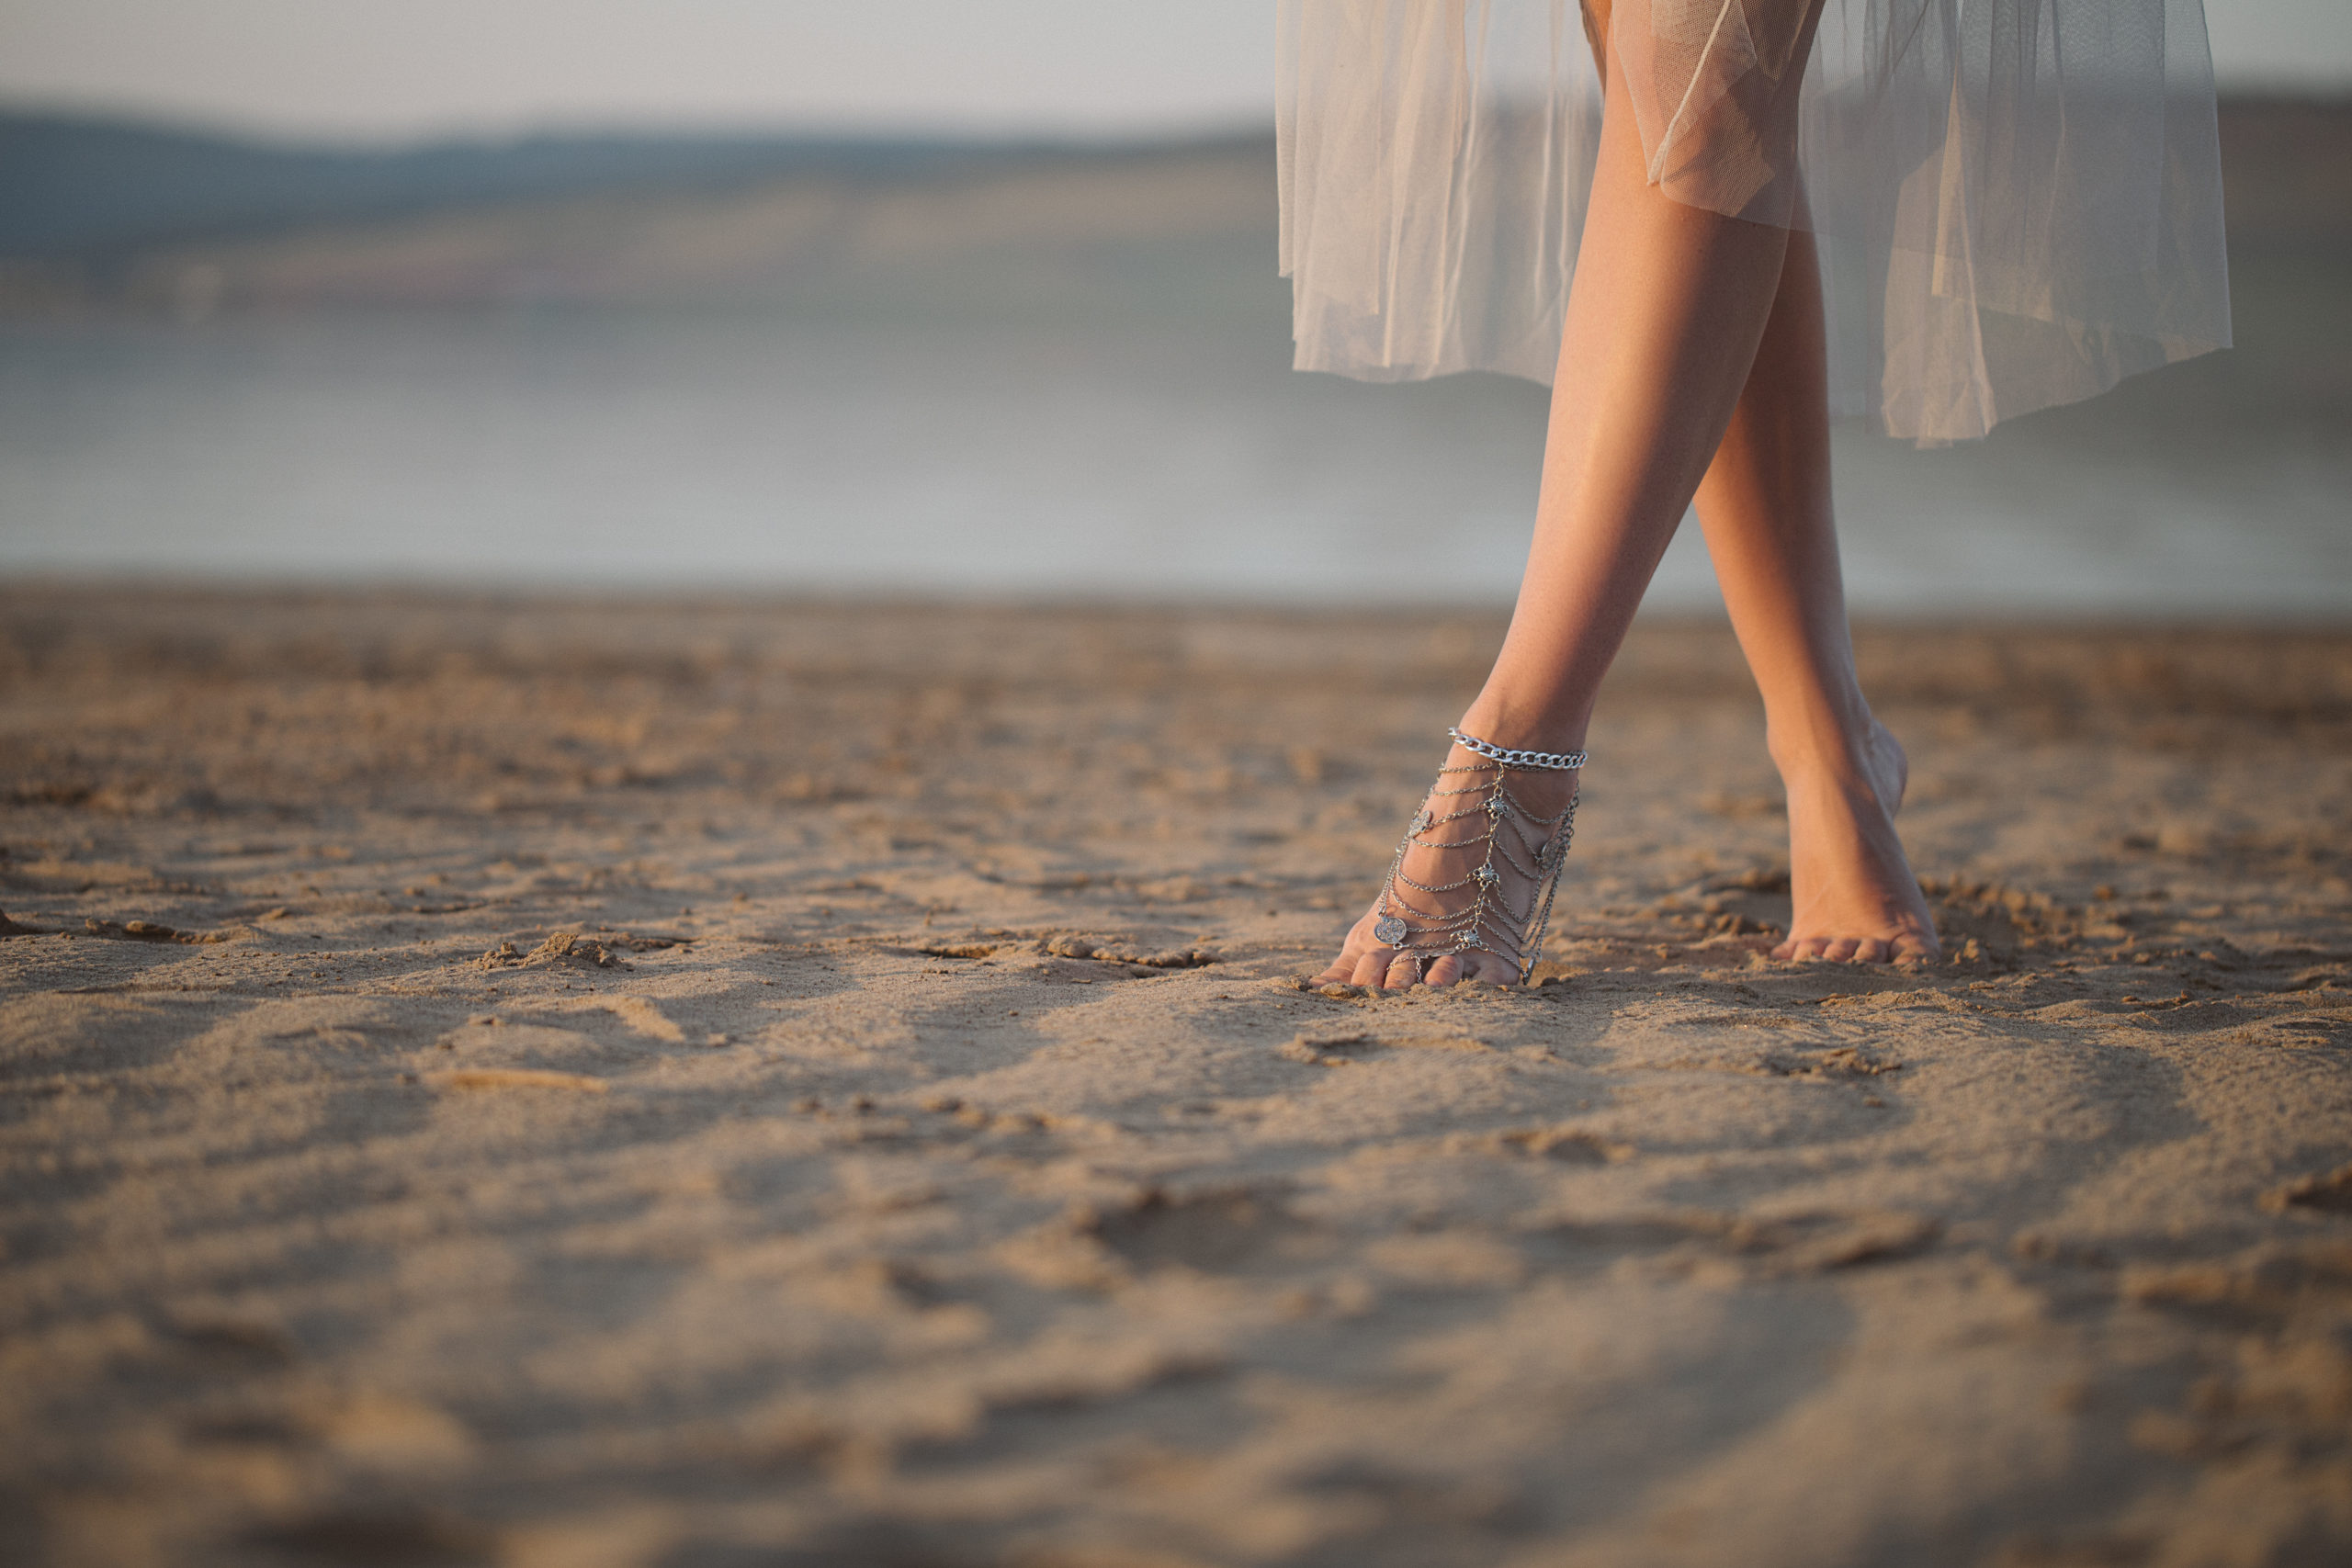 Legs of a woman in white dress enjoyong the sand on the beach.